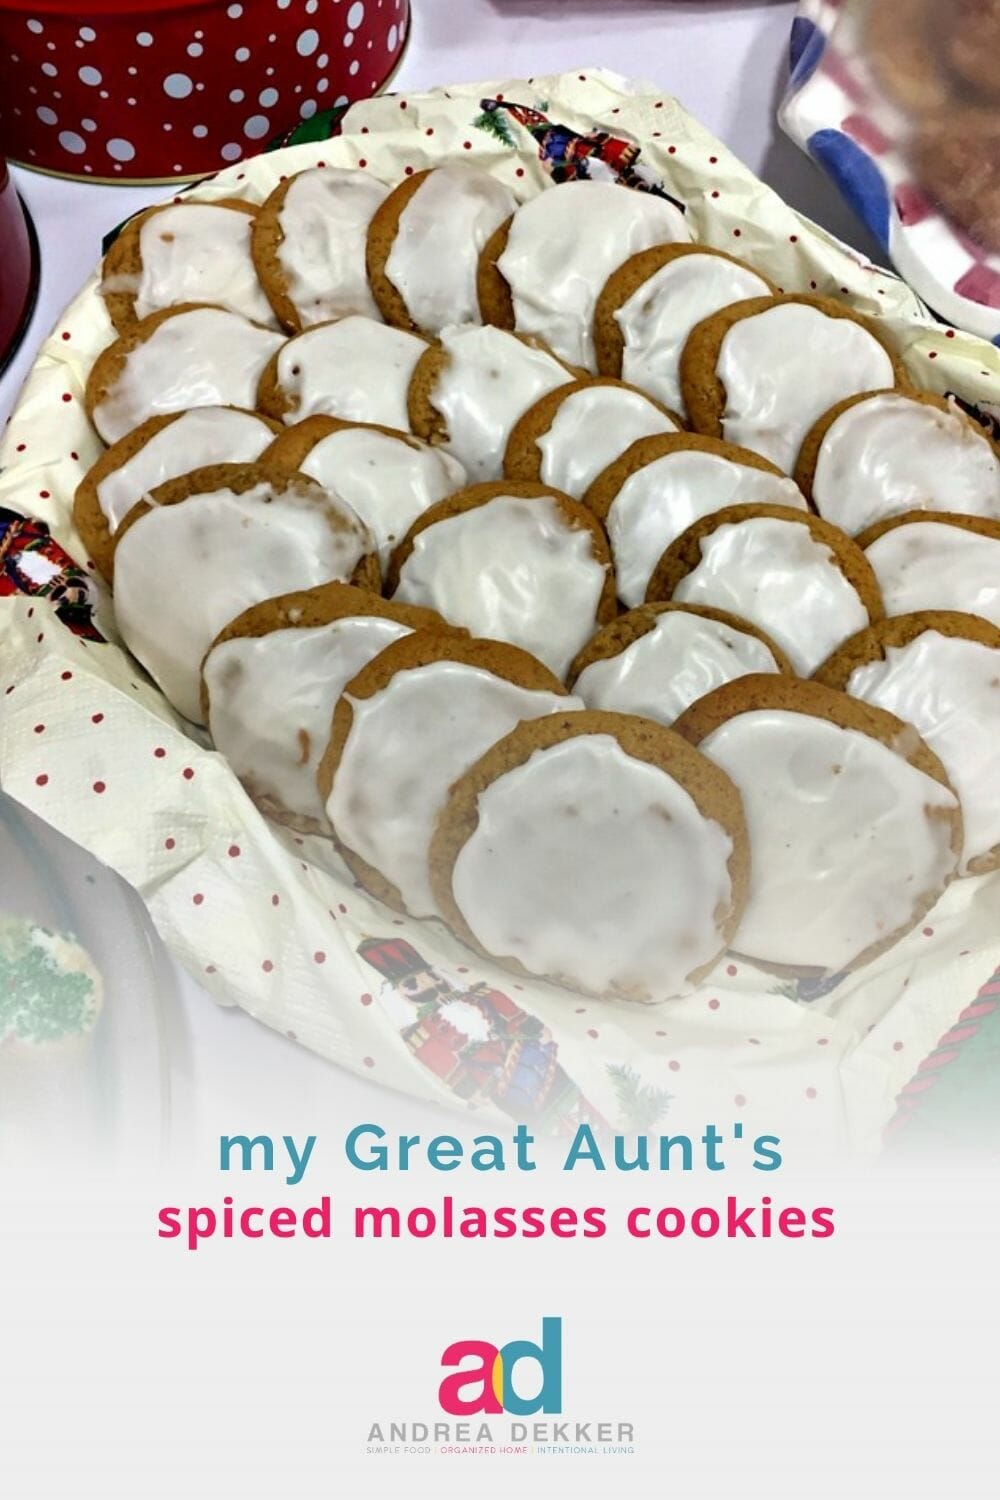 Although these spiced molasses cookies are good year-round, they are especially delicious during the holiday season — a special treat that brings back fond memories for my family! via @andreadekker